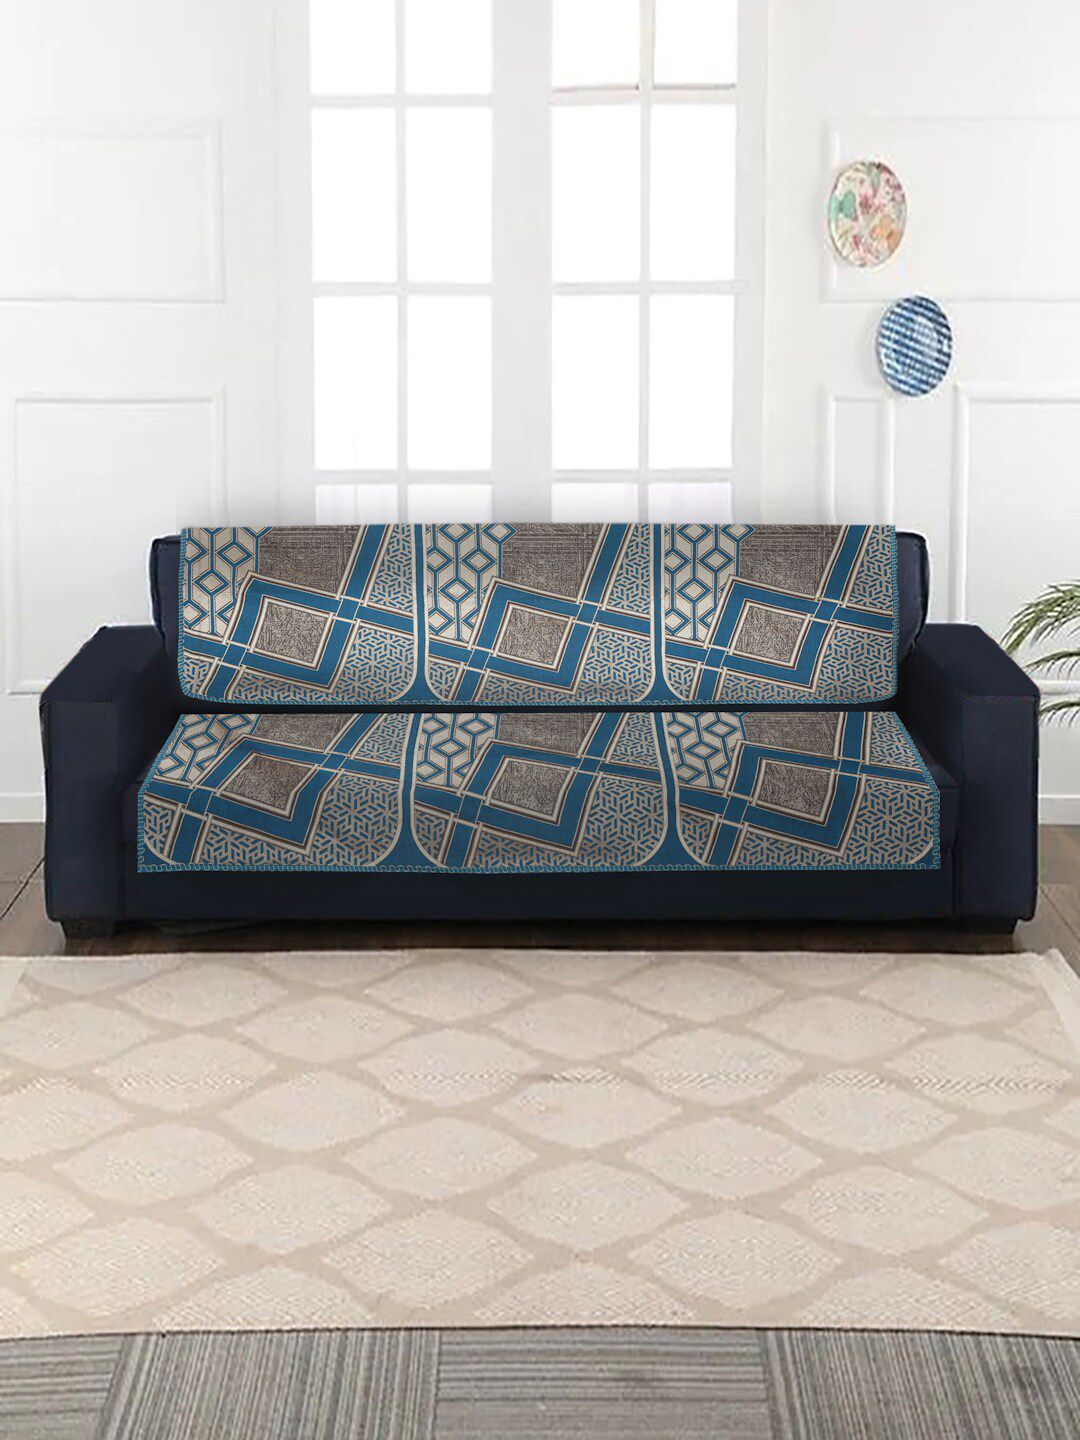 MULTITEX Blue & Grey Pack of 10 Sofa Covers for 5 Seater Sofa Set Price in India